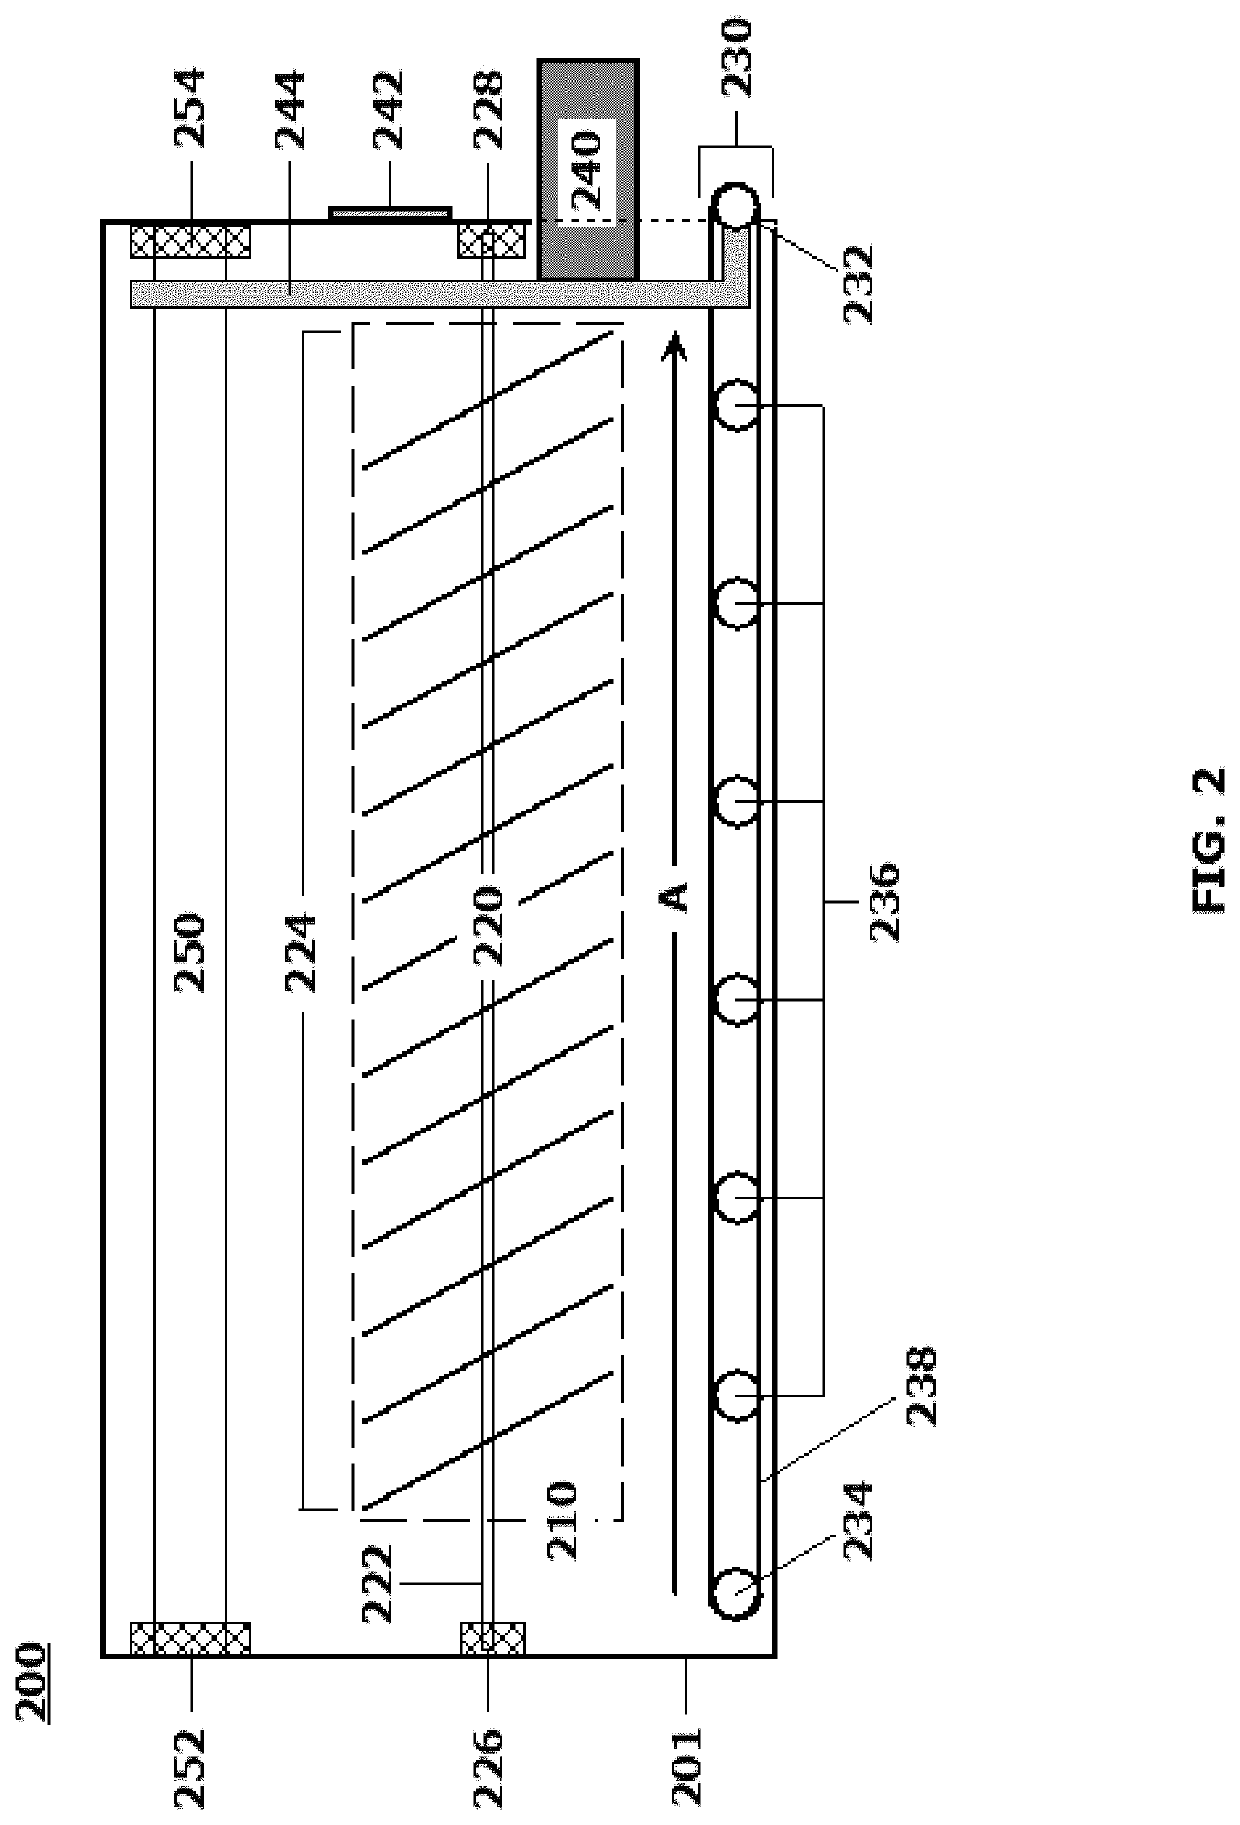 Material handling system for facilitating selective material movement and methods for employing such a system